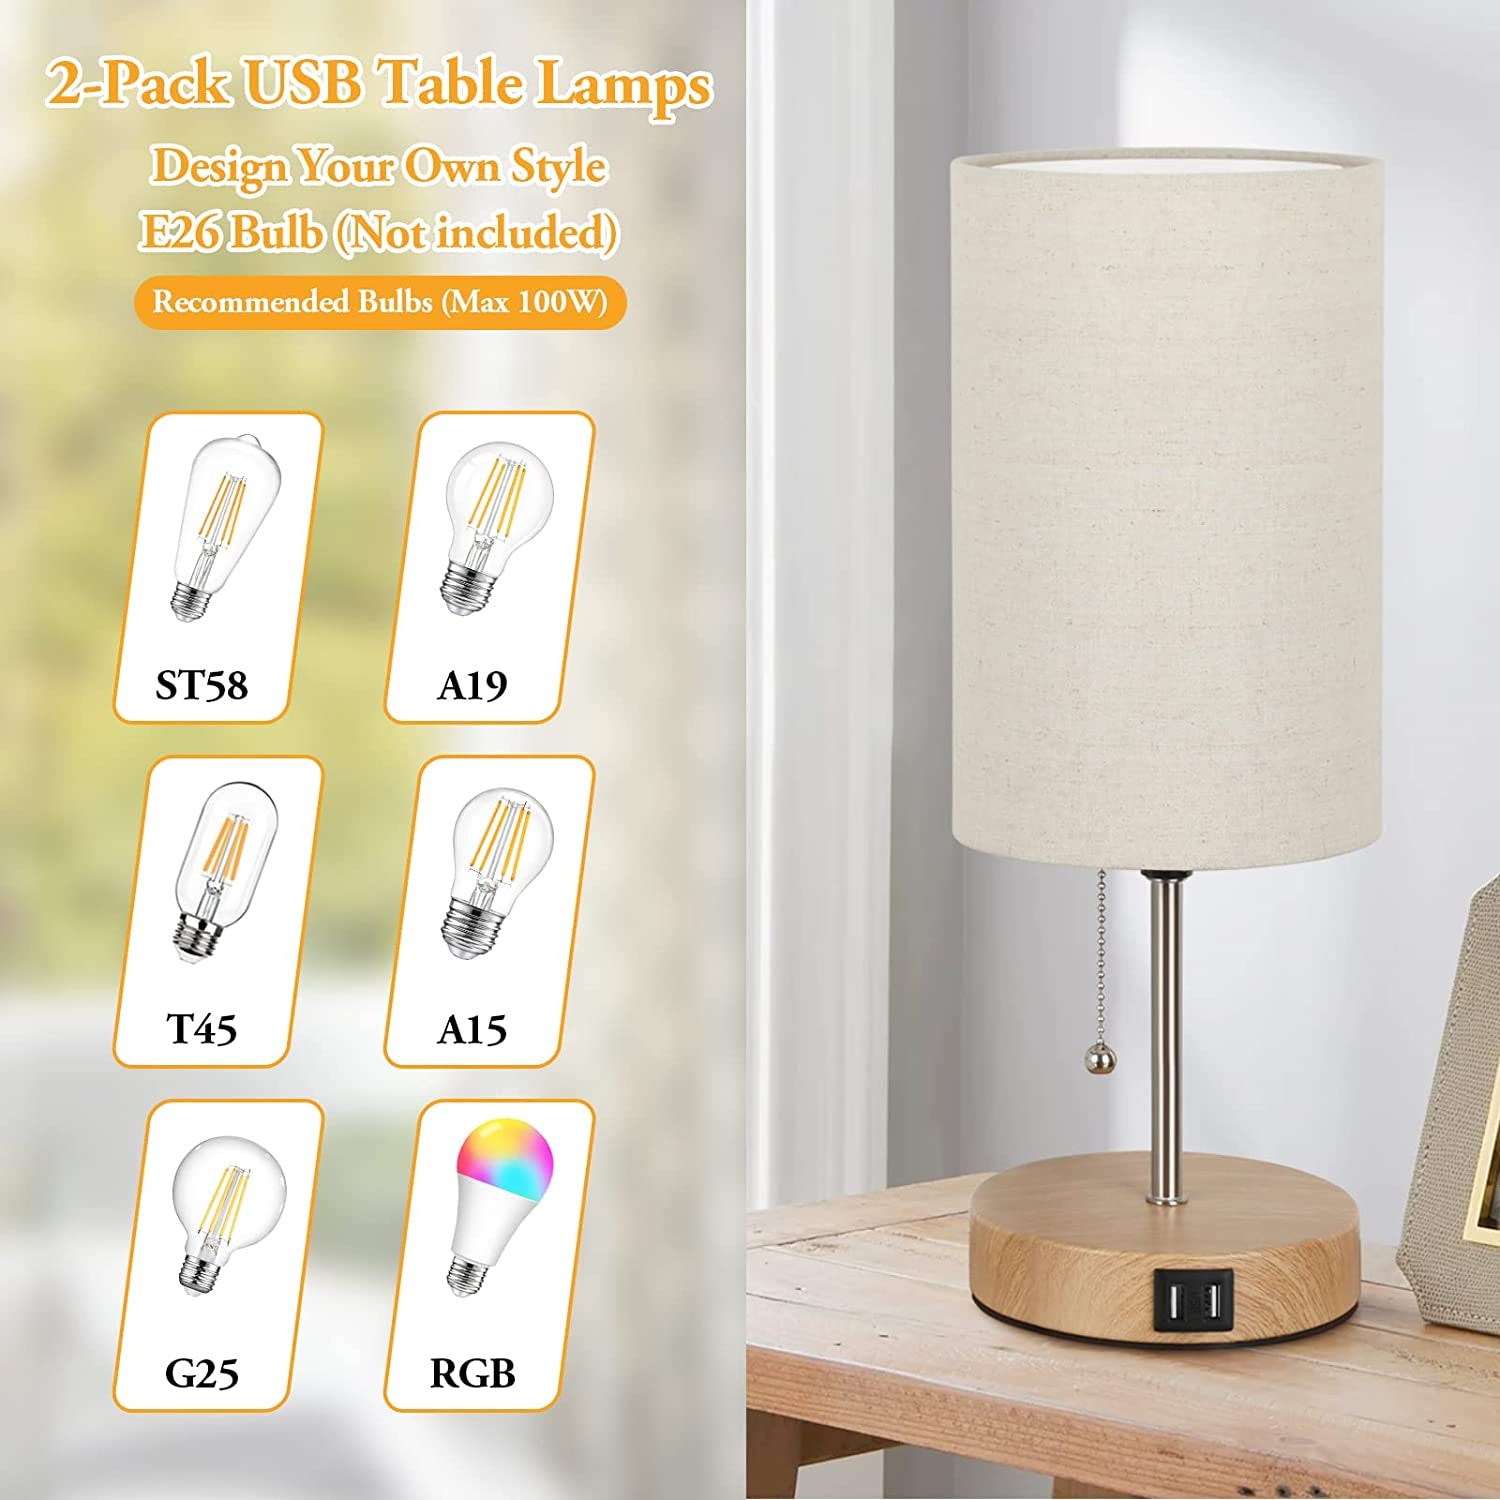 Set of 2 Table Lamps with 2 USB Ports, Modern Lamps with Pull Chain